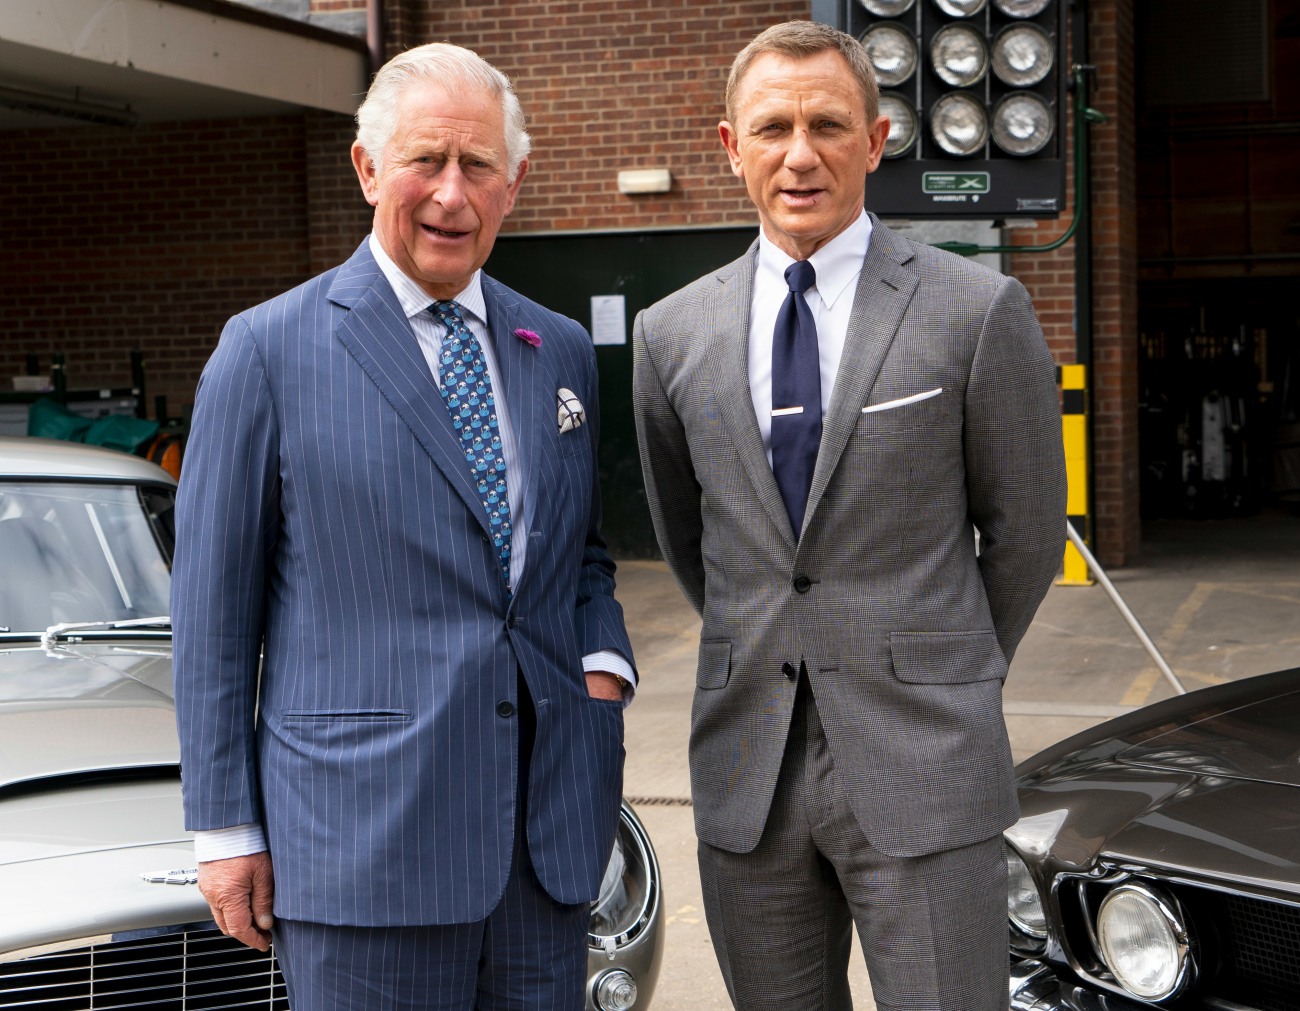 Britain's Prince Charles, Prince of Wales poses with British actor Daniel Craig as he tours the set of the 25th James Bond Film at Pinewood Studios in Iver Heath, west of London, on June 20, 2019. - The Prince of Wales, Patron, The British Film Institute